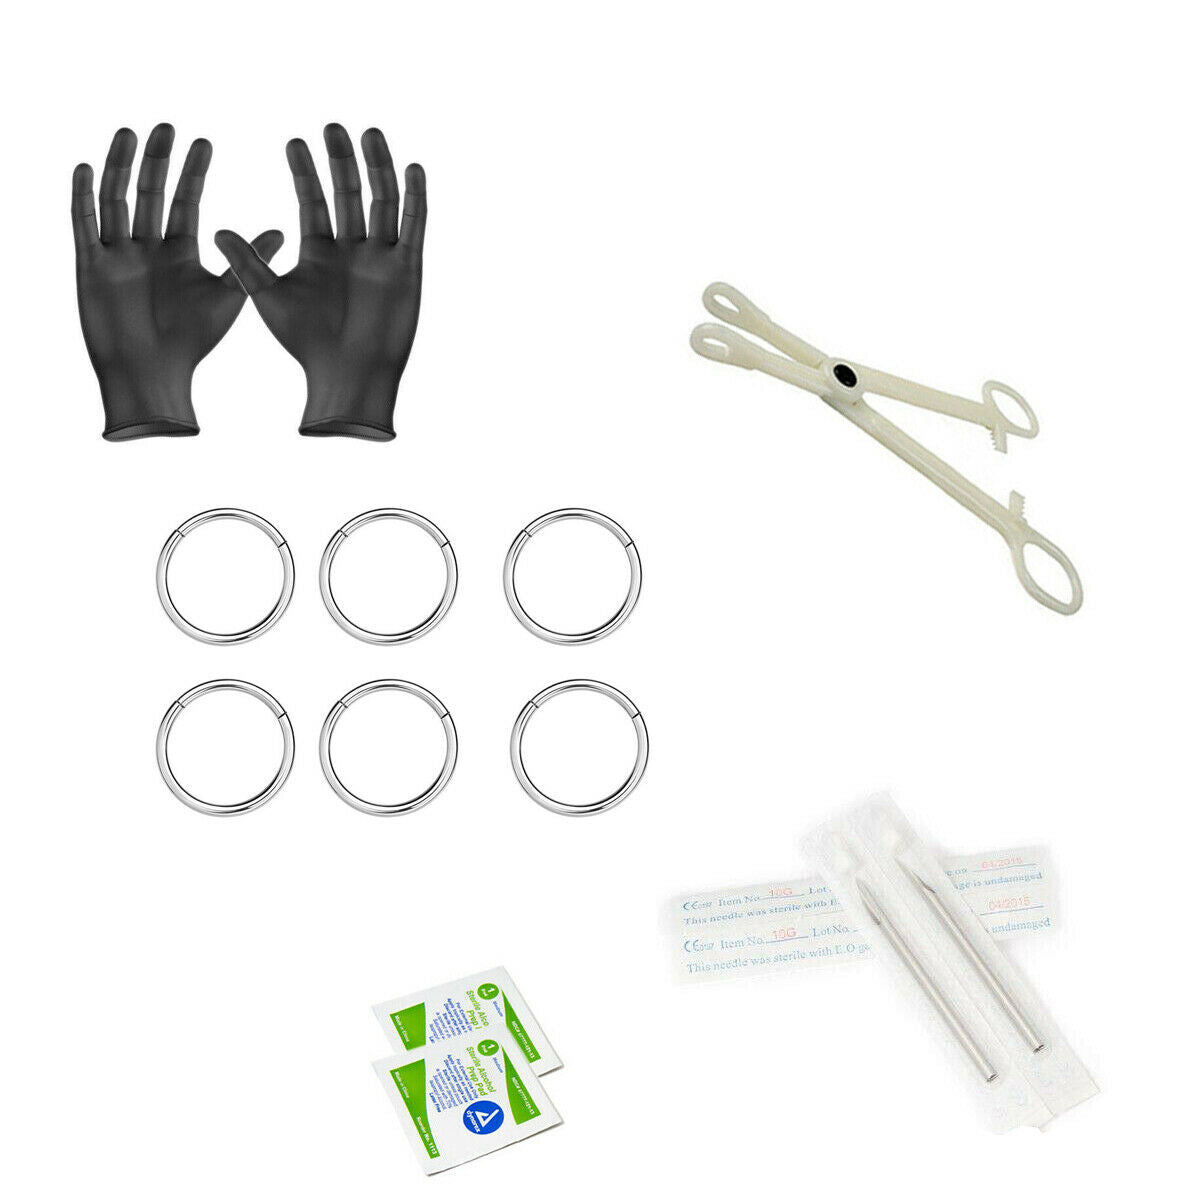 12-Piece Hinged Ring Piercing Kit - Includes (6) 14g Hinged Ring, (2) Needles, (1) Forceps, (2) Alcohol Wipes and a Pair of Gloves